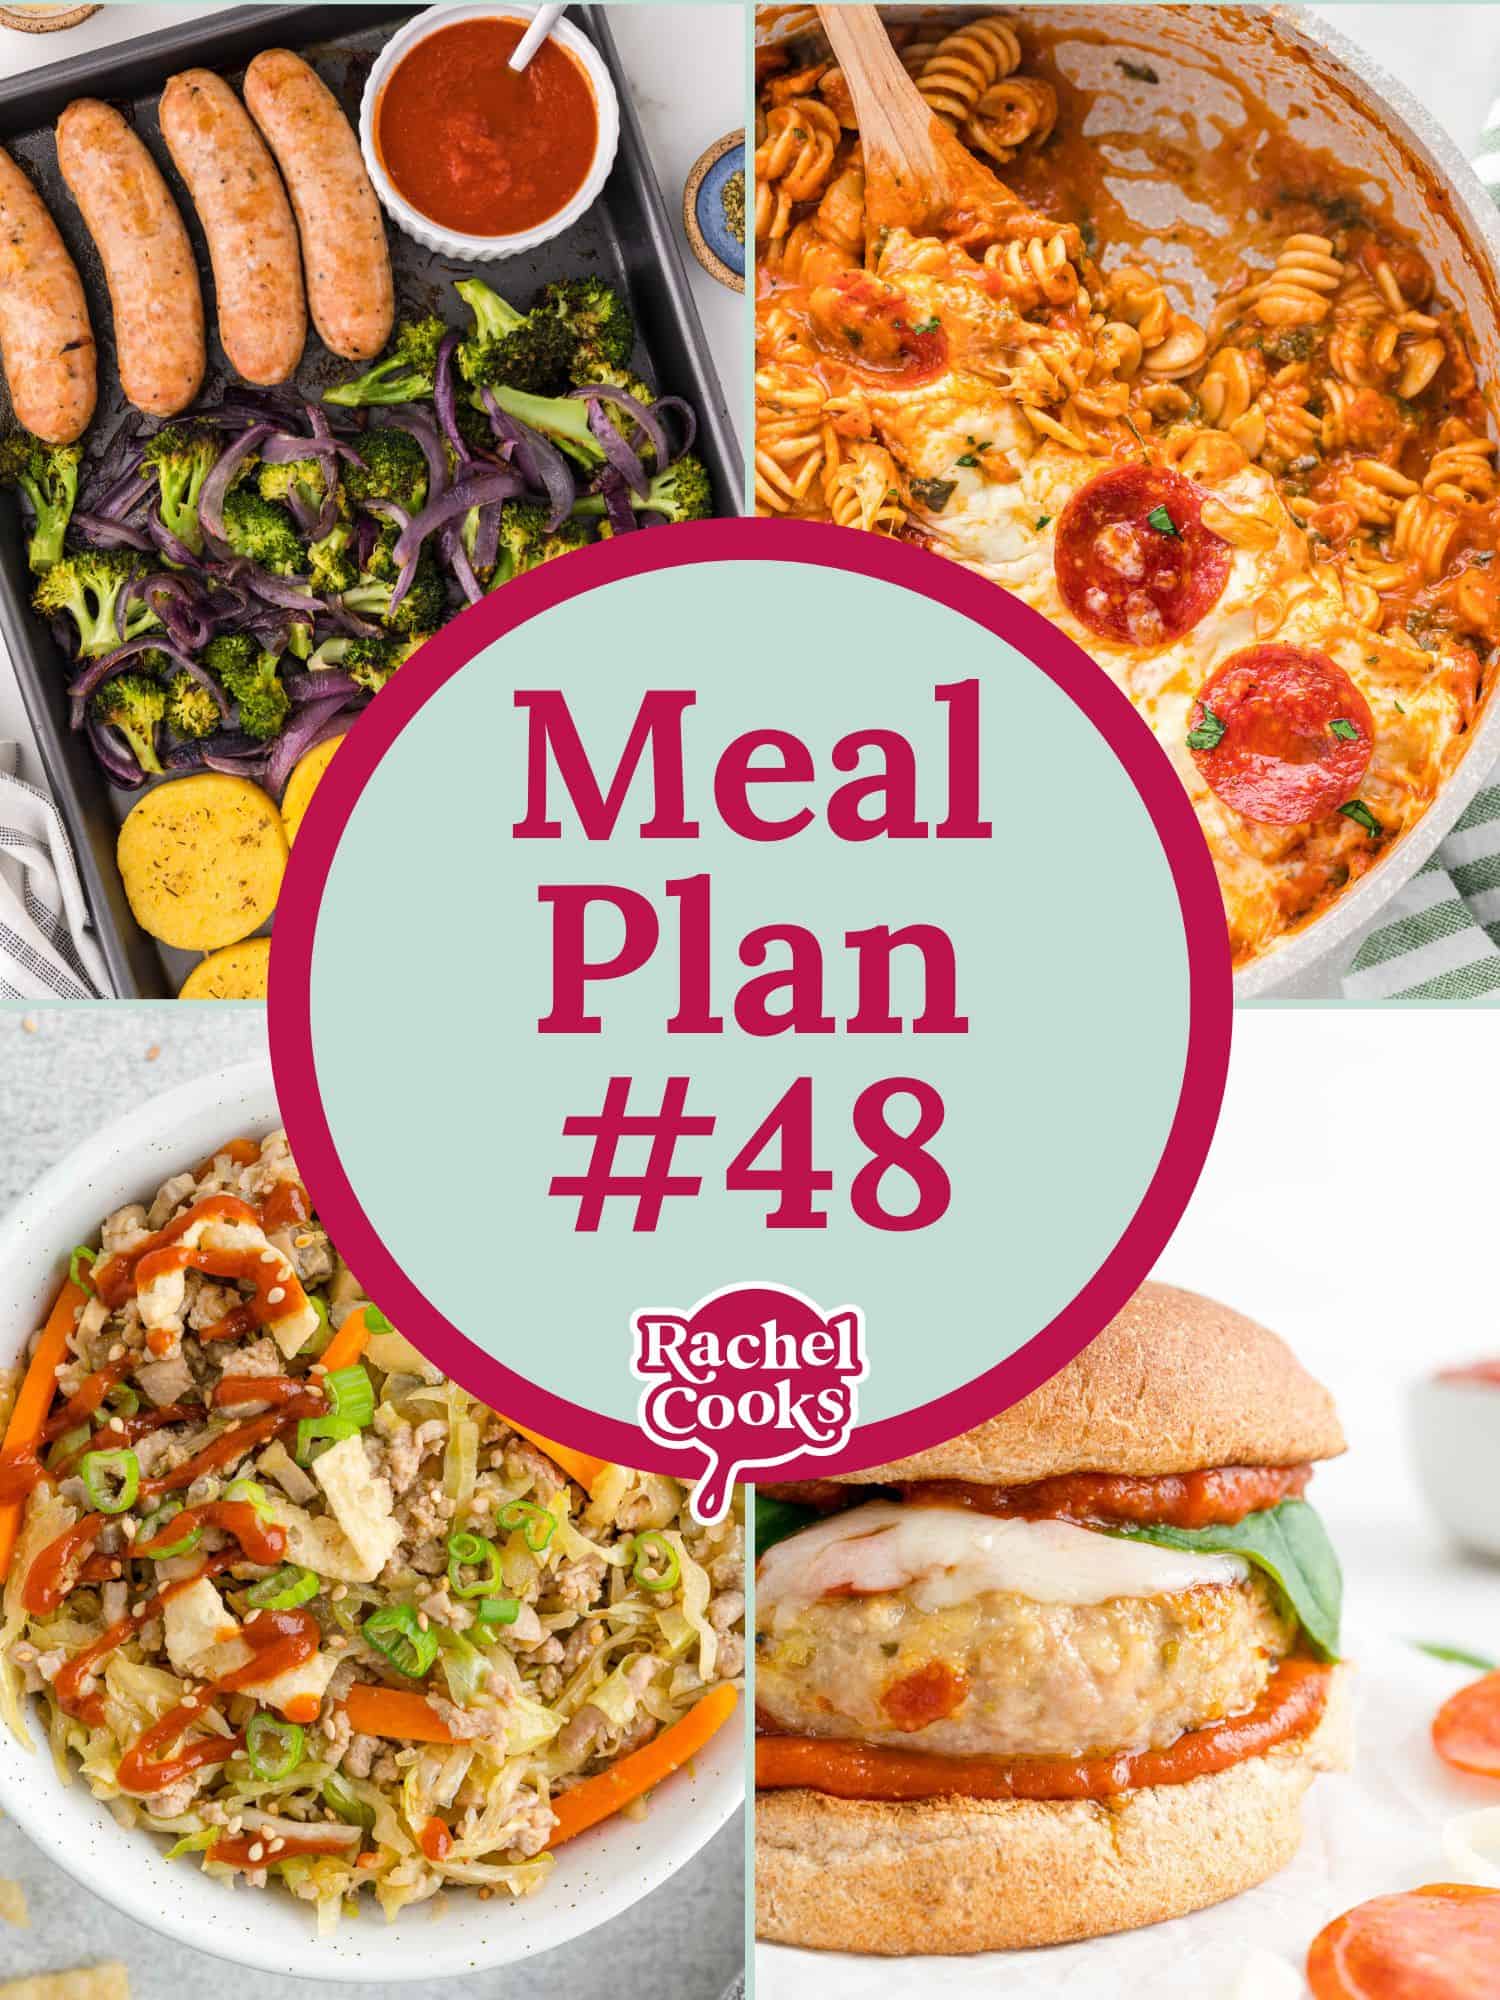 Meal plan 48 preview image.